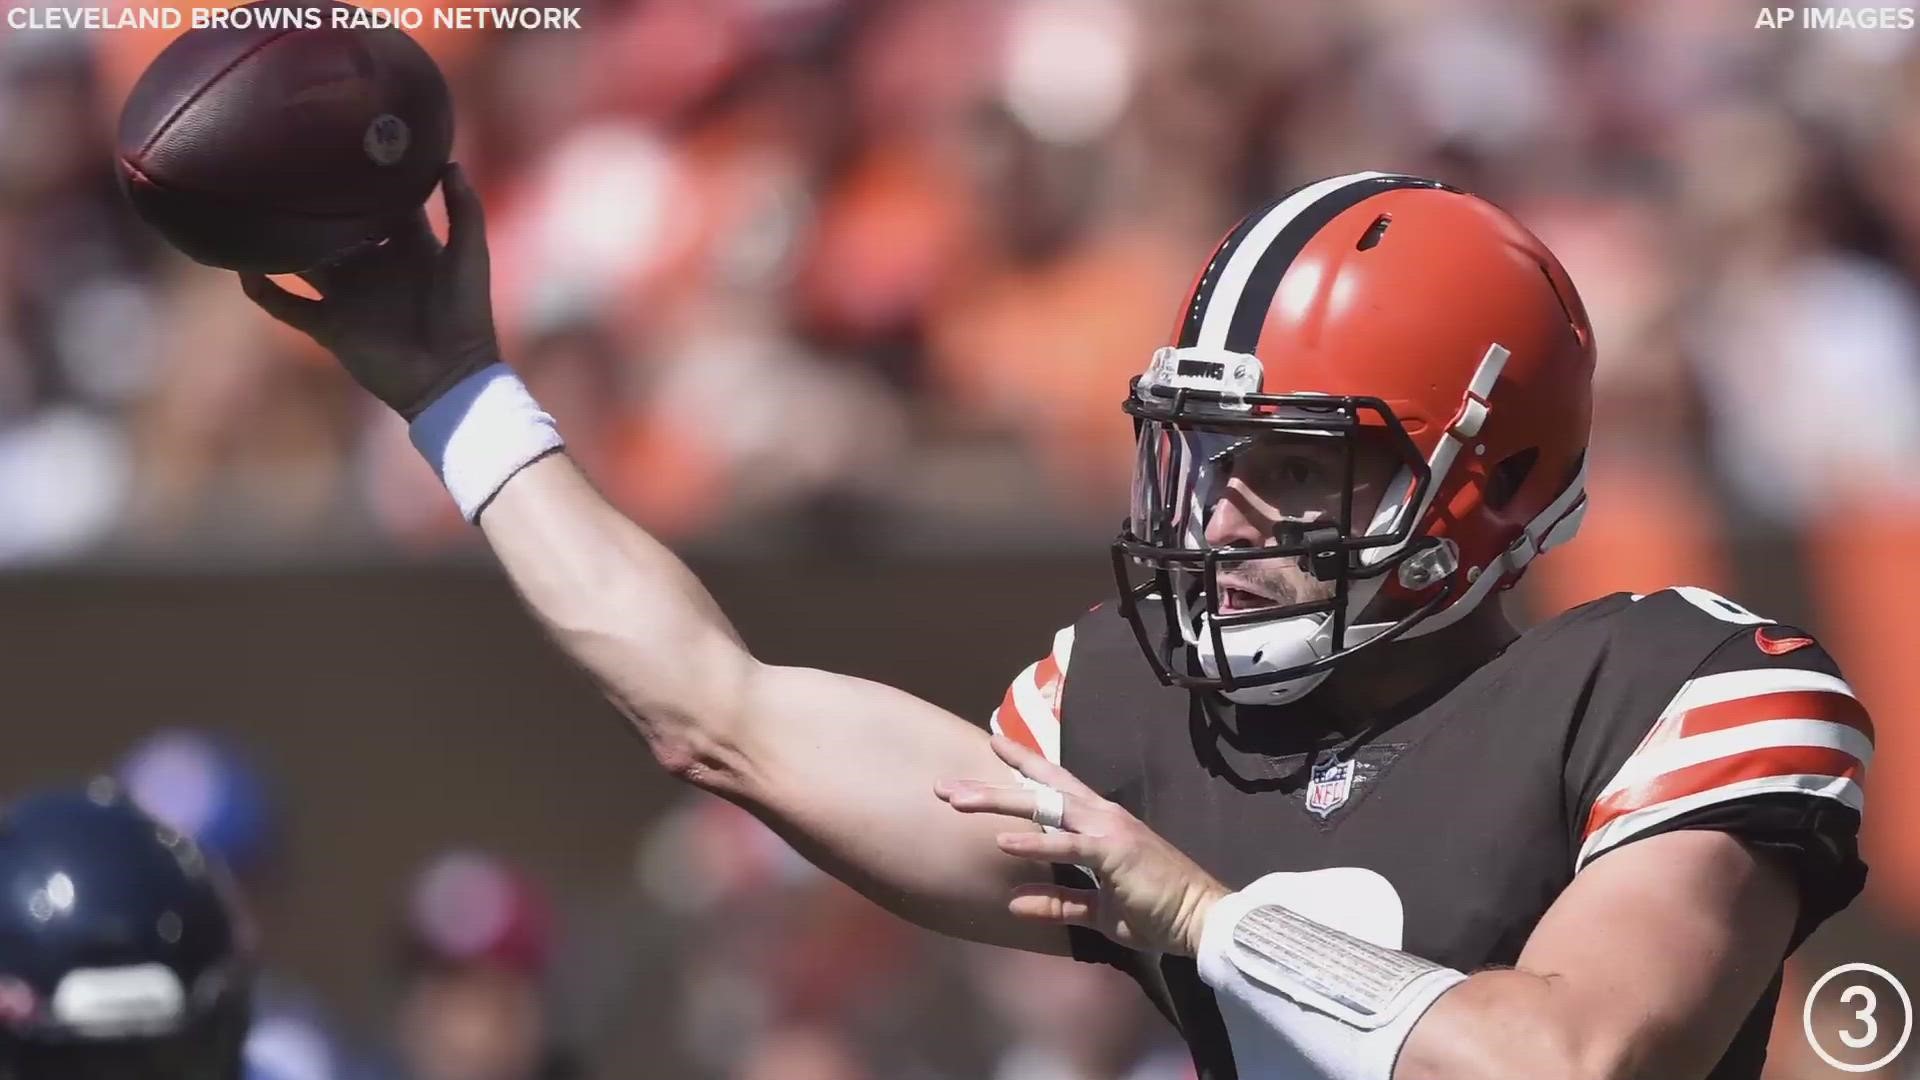 Cleveland Browns quarterback Baker Mayfield appeared to injure his shoulder after making a tackle following an interception vs. the Houston Texans.